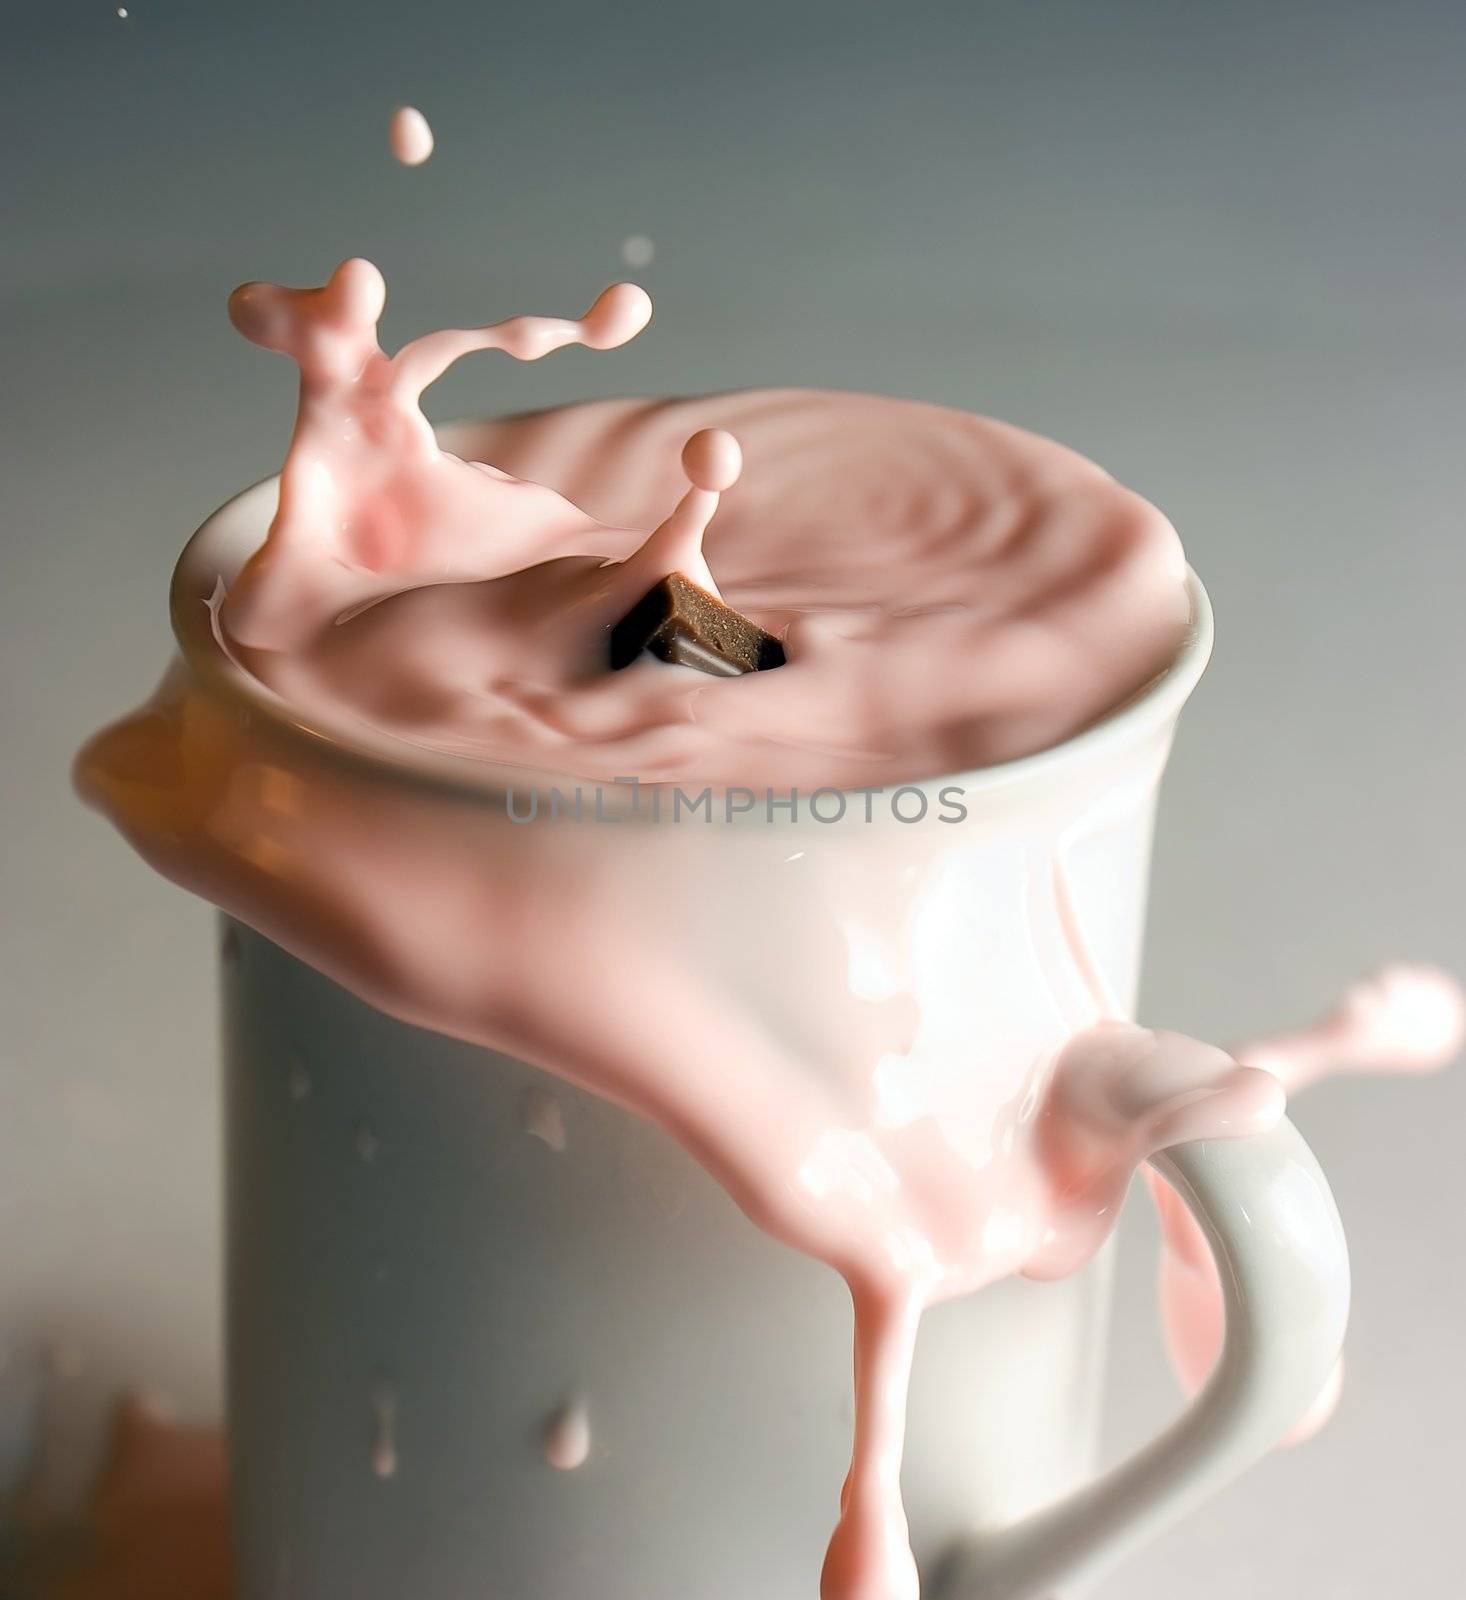 The mug with a dairy cocktail in which falls chocolate